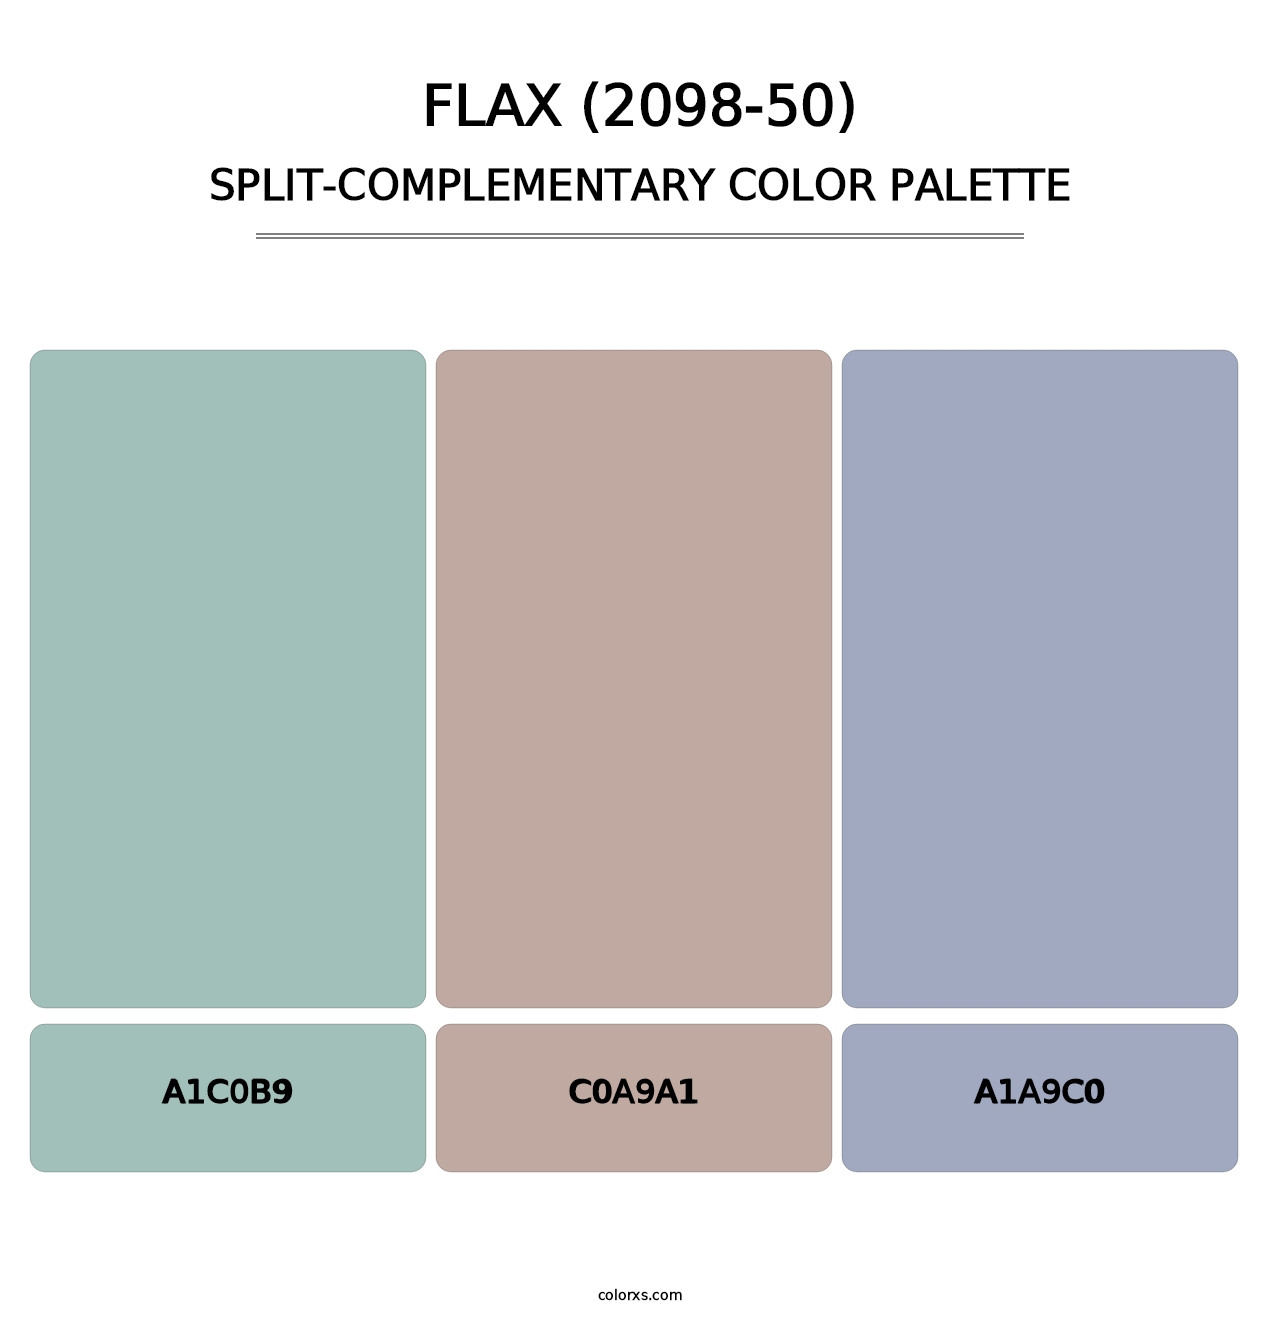 Flax (2098-50) - Split-Complementary Color Palette